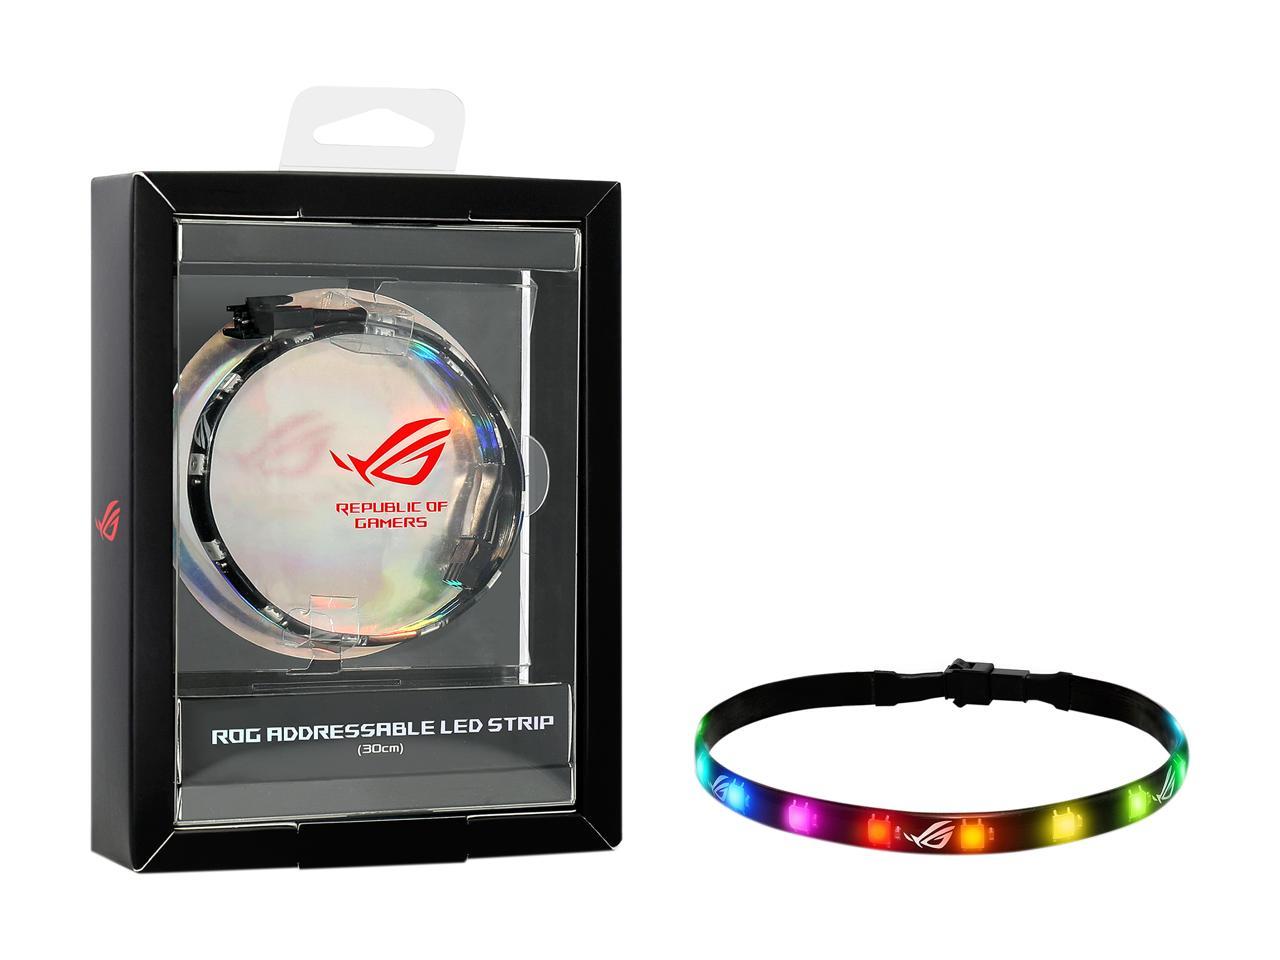 ASUS ROG Addressable RGB 5050 LED 30cm Lighting Strip with Magnetic Backing and Adhesive Strips for use with AURA Sync RGB Lighting Software